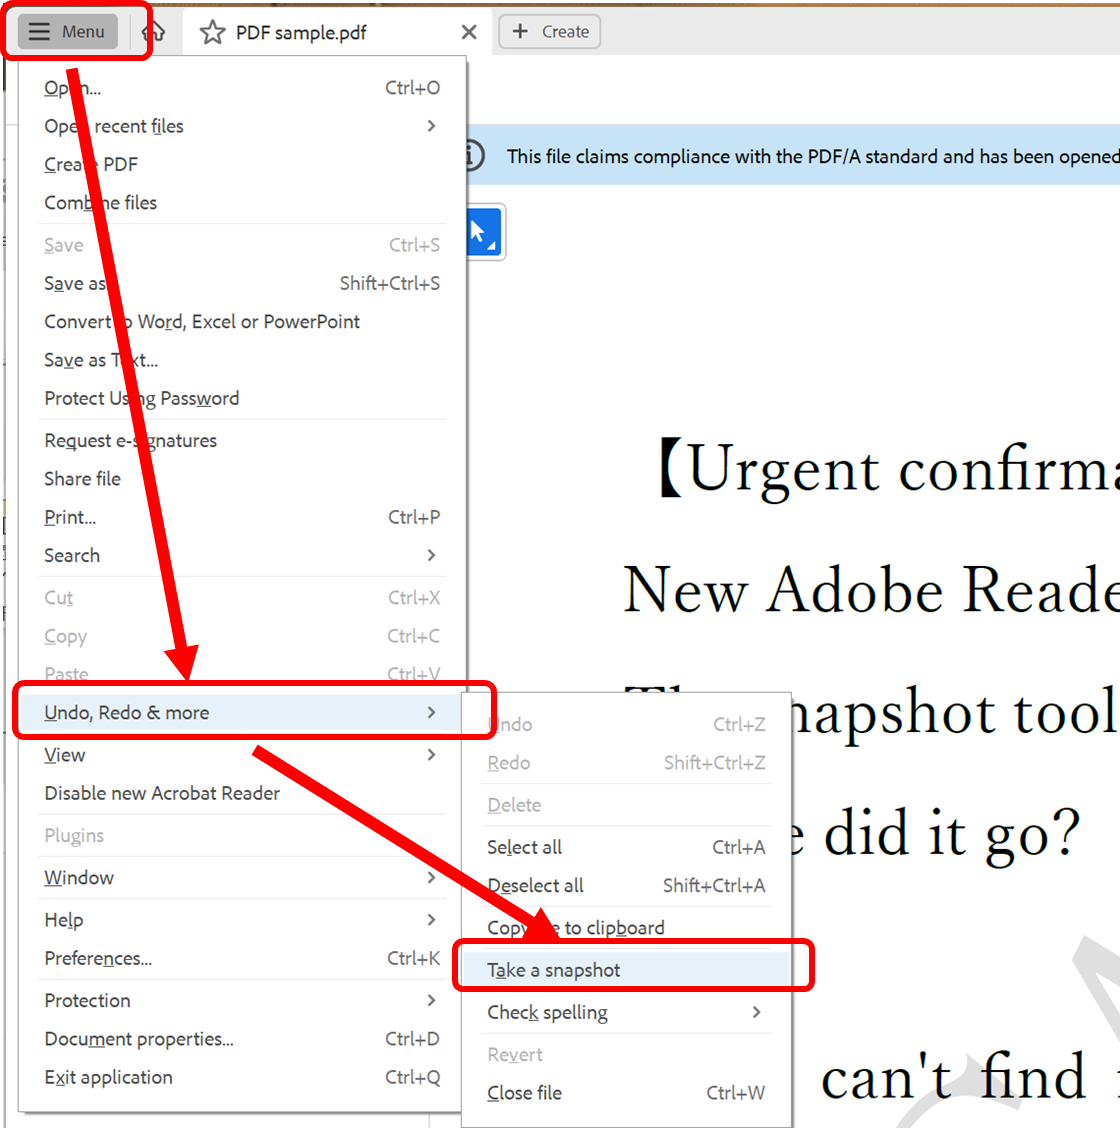 The location of the Snapshot Tool in the new Acrobat Reader is as follows: Menu -> Edit -> Undo, Redo, and More -> Snapshot